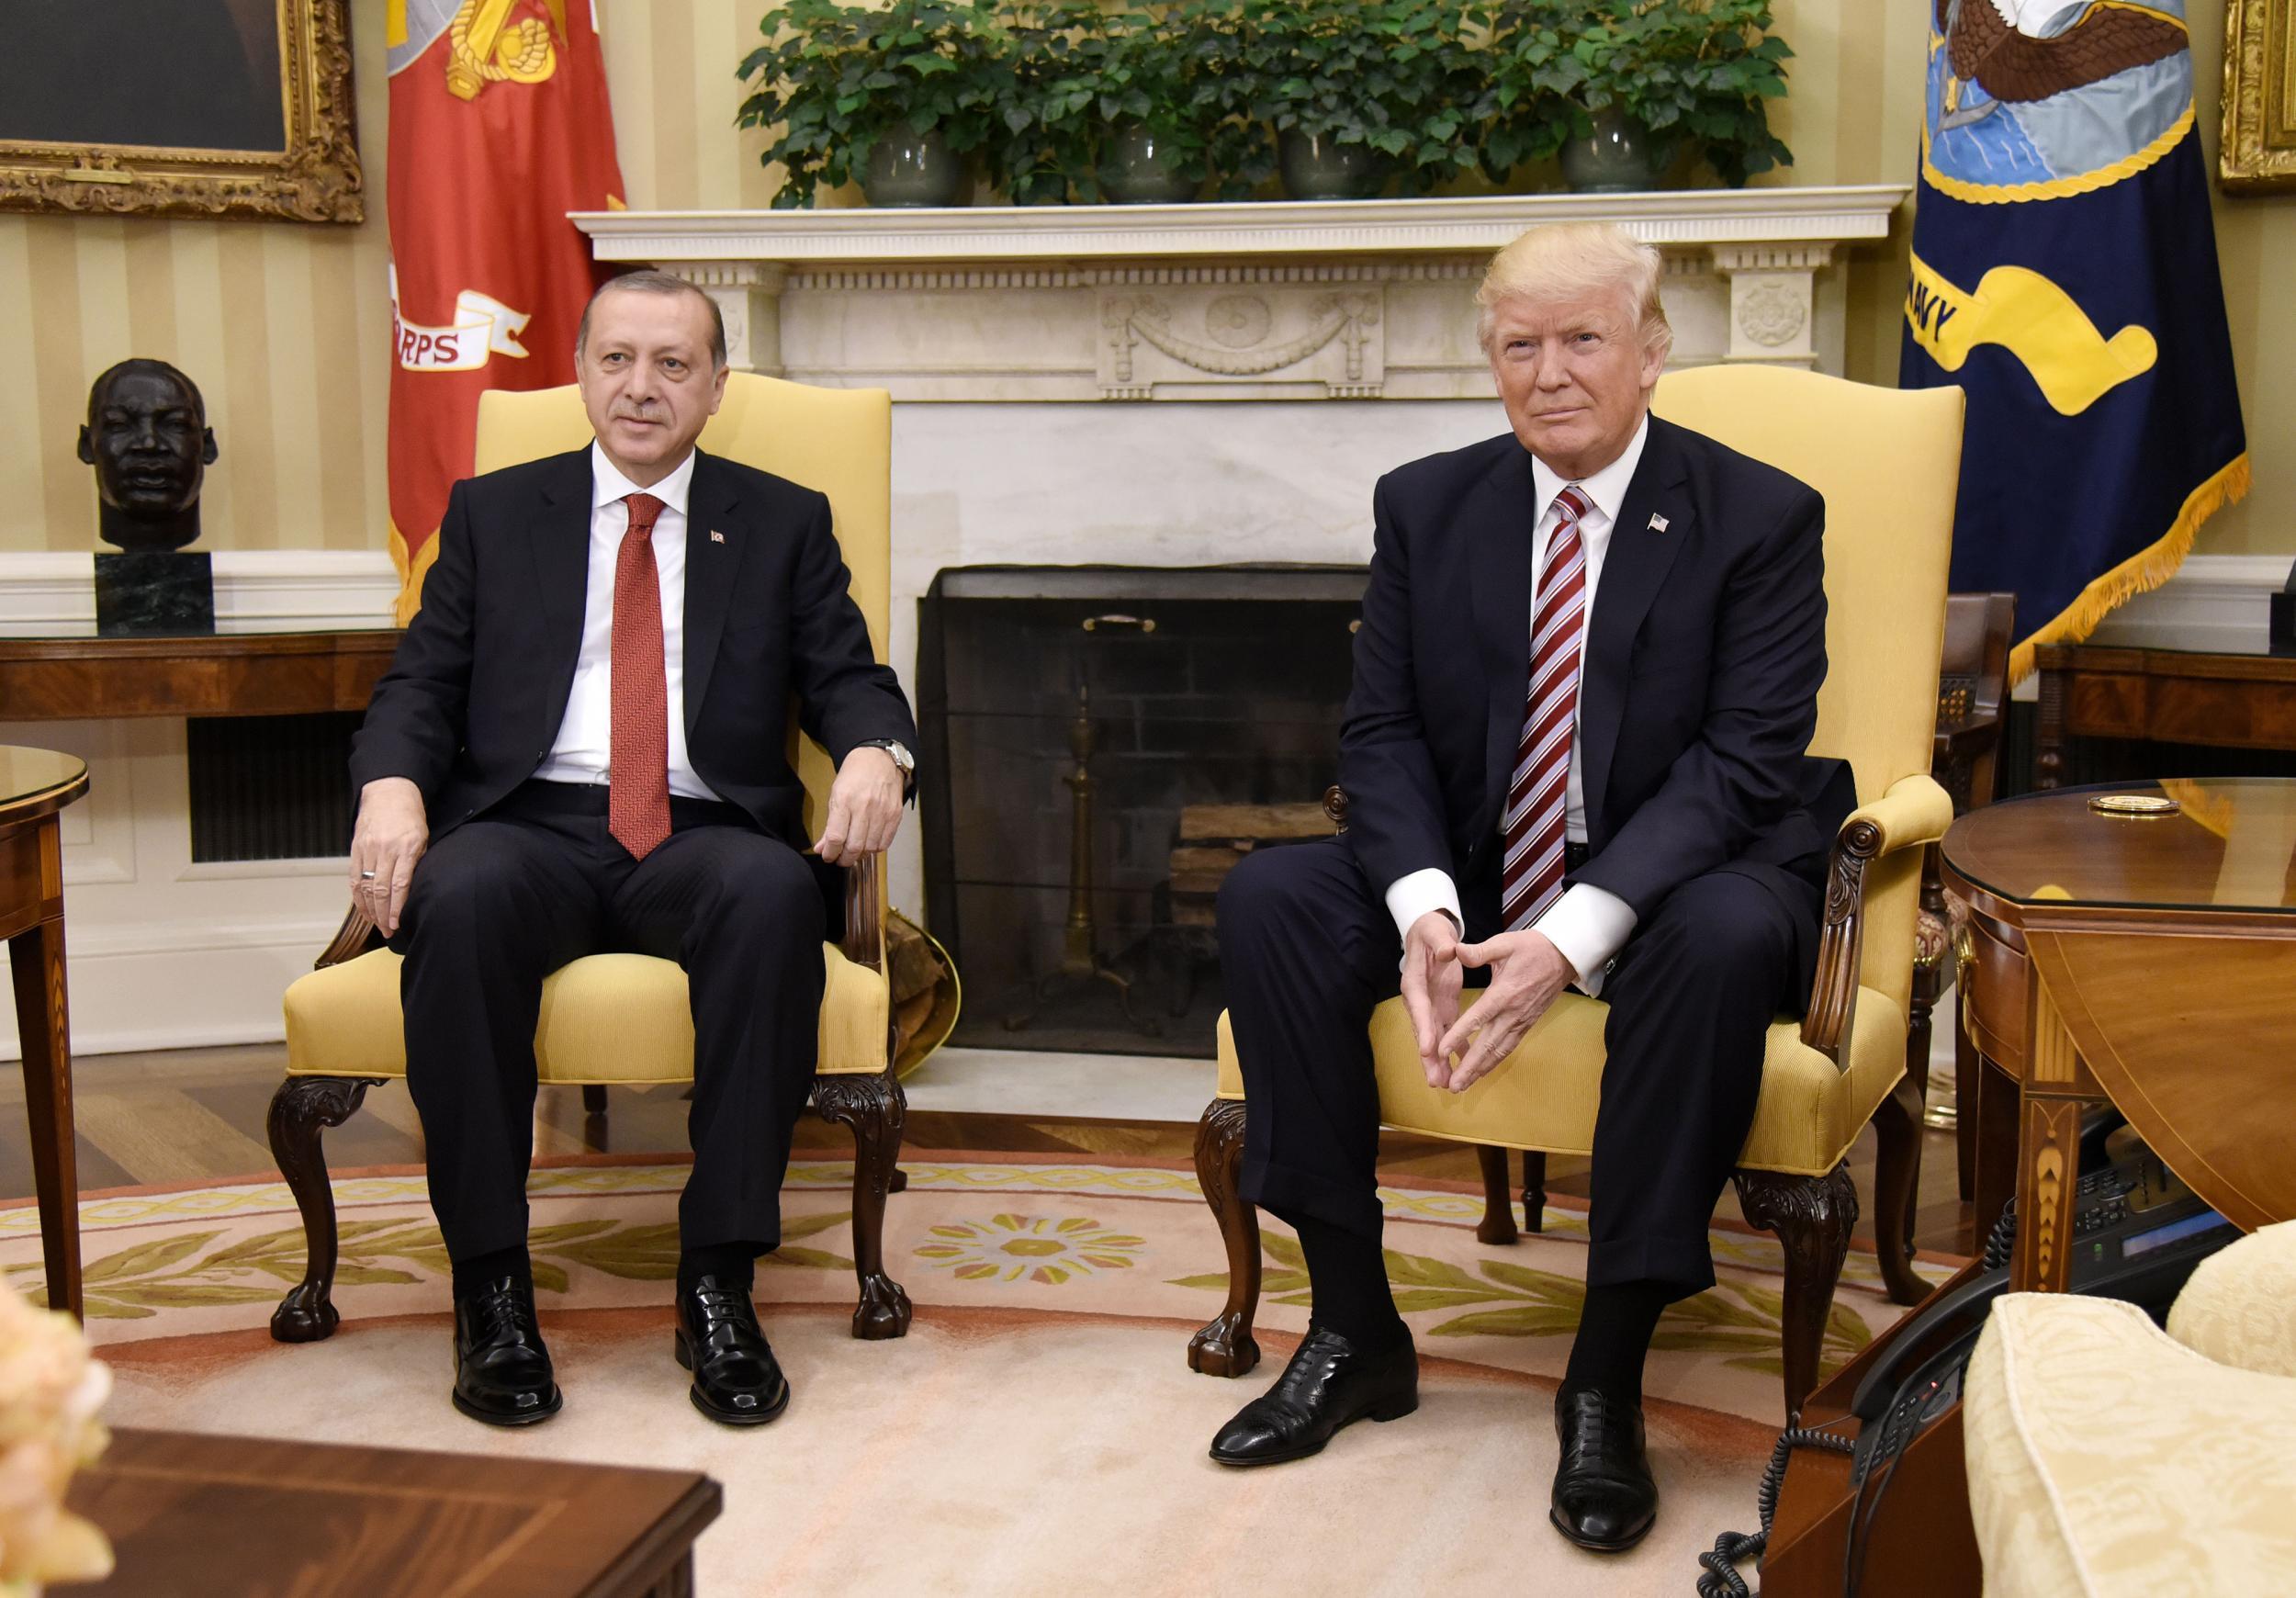 President Donald Trump meets with President Recep Tayyip Erdogan of Turkey in the Oval Office of the White House